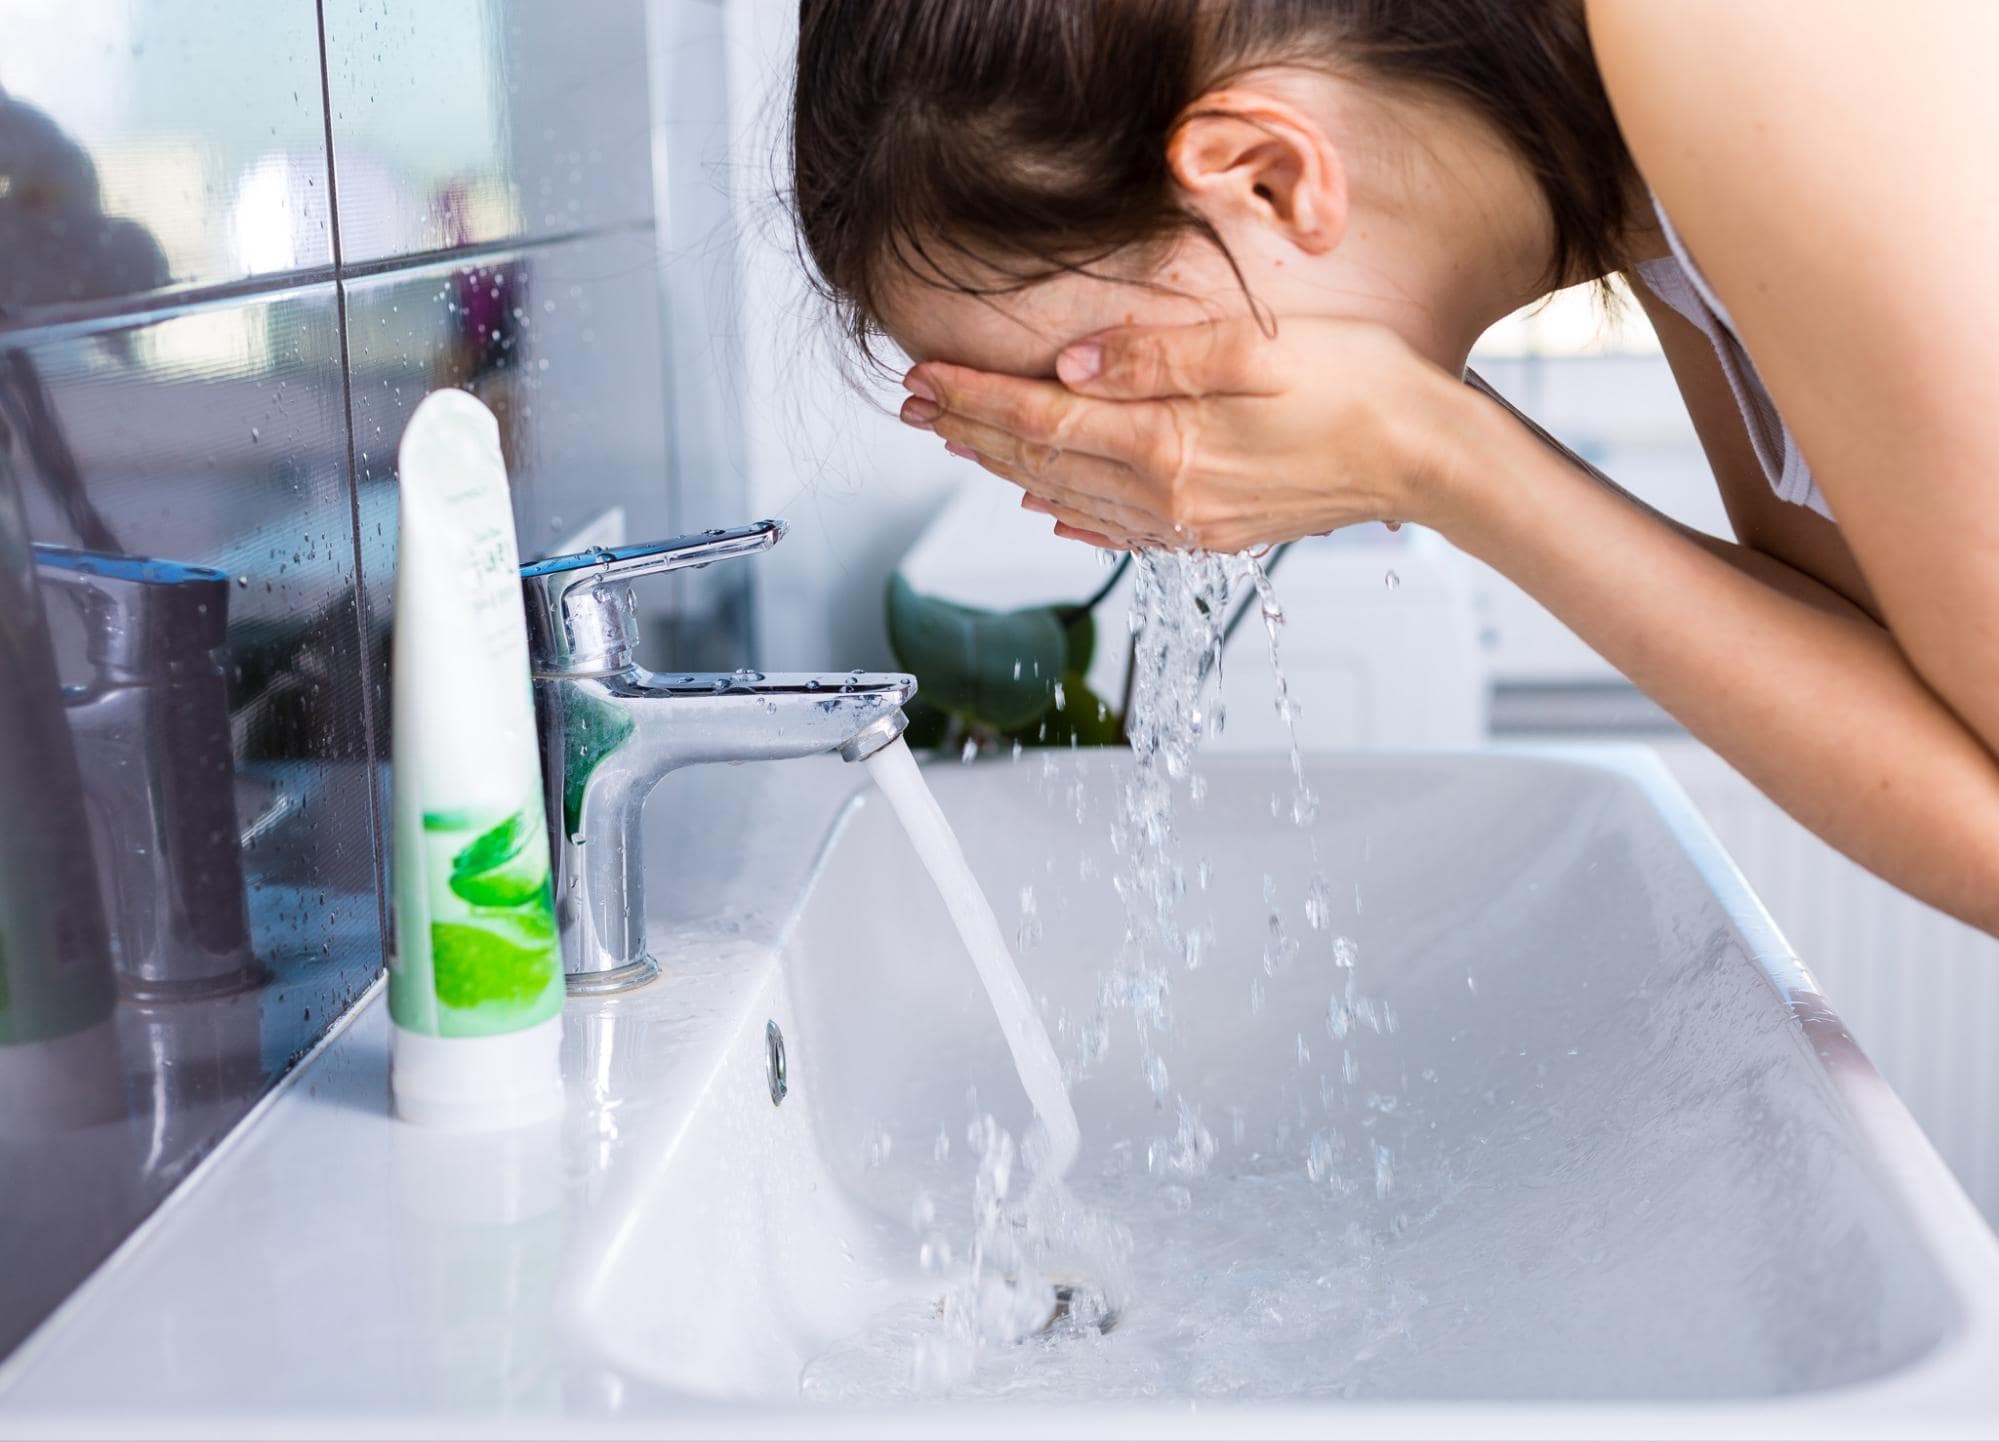 A woman washing her face in the bathroom sink with a face wash tube next to her.